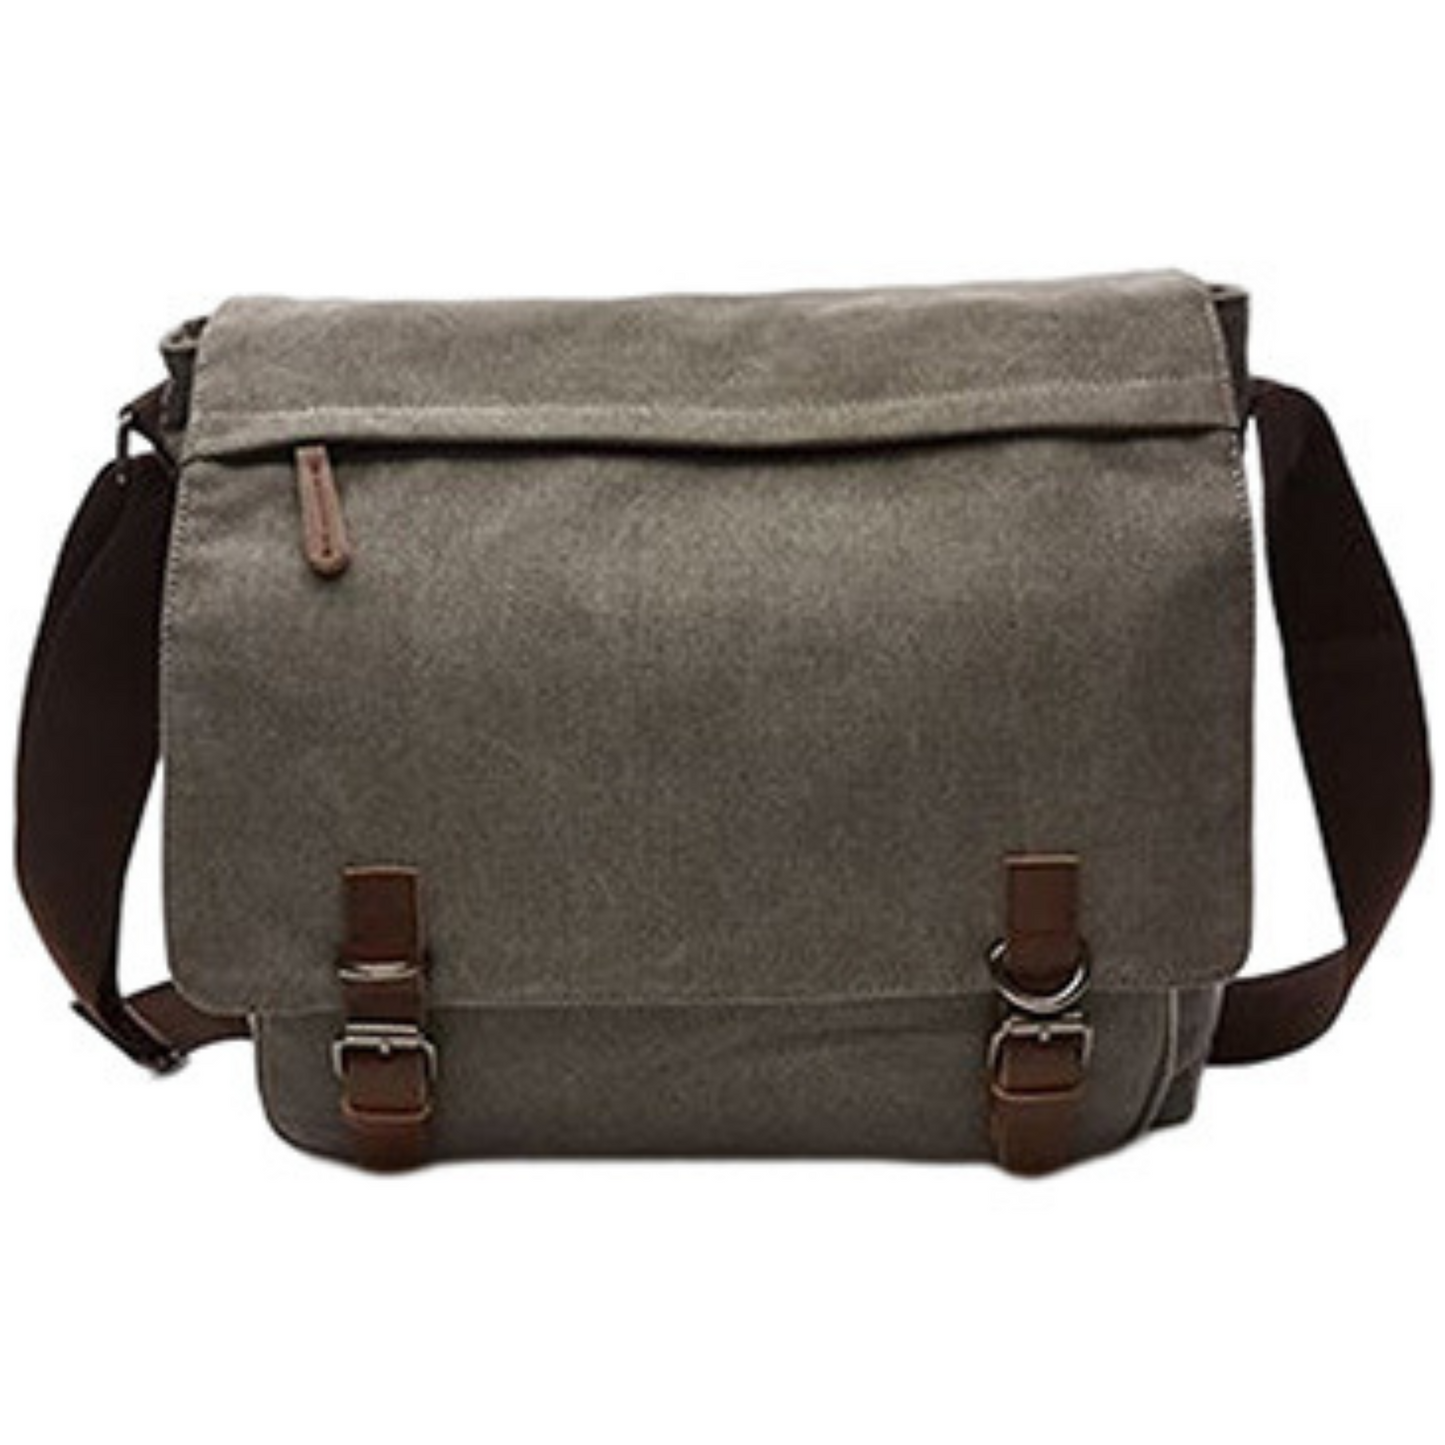 Large 15" Canvas Cross Body Messenger Satchel and Computer Travel Bag